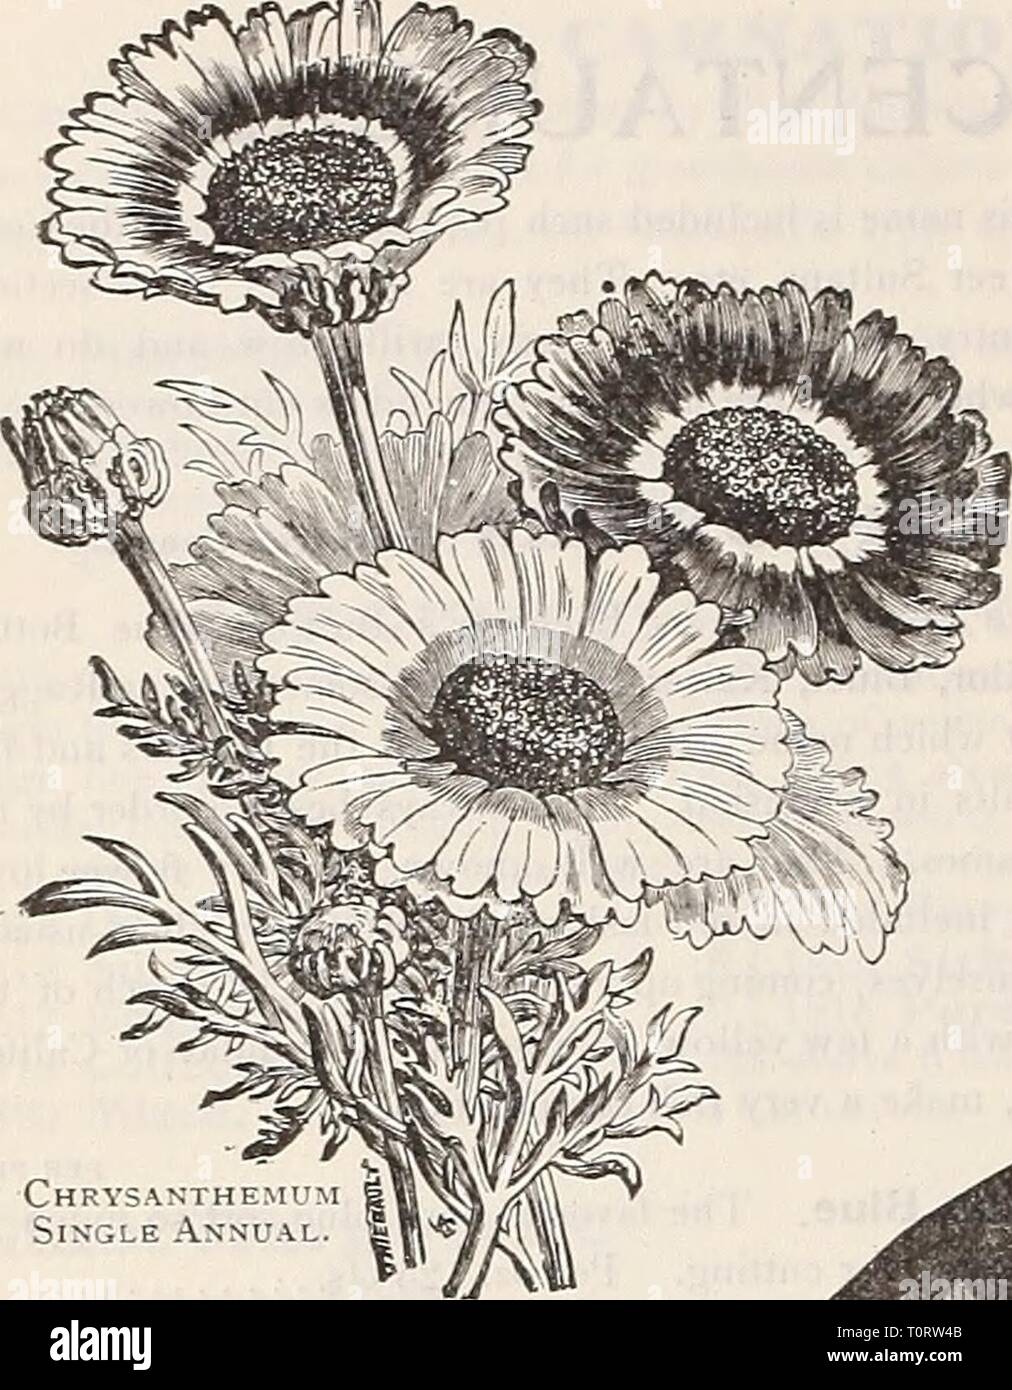 Dreer's garden book  seventy-third Dreer's garden book : seventy-third annual edition 1911  dreersgardenbook1911henr Year: 1911  84 fl llRiENRYADREER -PhlL^DELPHIAPA-^S^ RELIABLE FLOWER SEEDS CHRYSANTHEMUMS. PERENNIAL VARIETIES. PFR PKT. 19-41 Frutescens Grandiflorum. {'Paris Daisy ' or. Mar- guerite.) White, yellow eye 10 1942 Comtesse de Chambord (Fellow Bin's Daisy). Similar to the above except in color, which is a beautiful clear yellow 10 1944 Japanese Hybrids. The seed here offered has been saved from a magnificent collection. Seed sown in spring will produce flower- ing plants by fall 1 Stock Photo